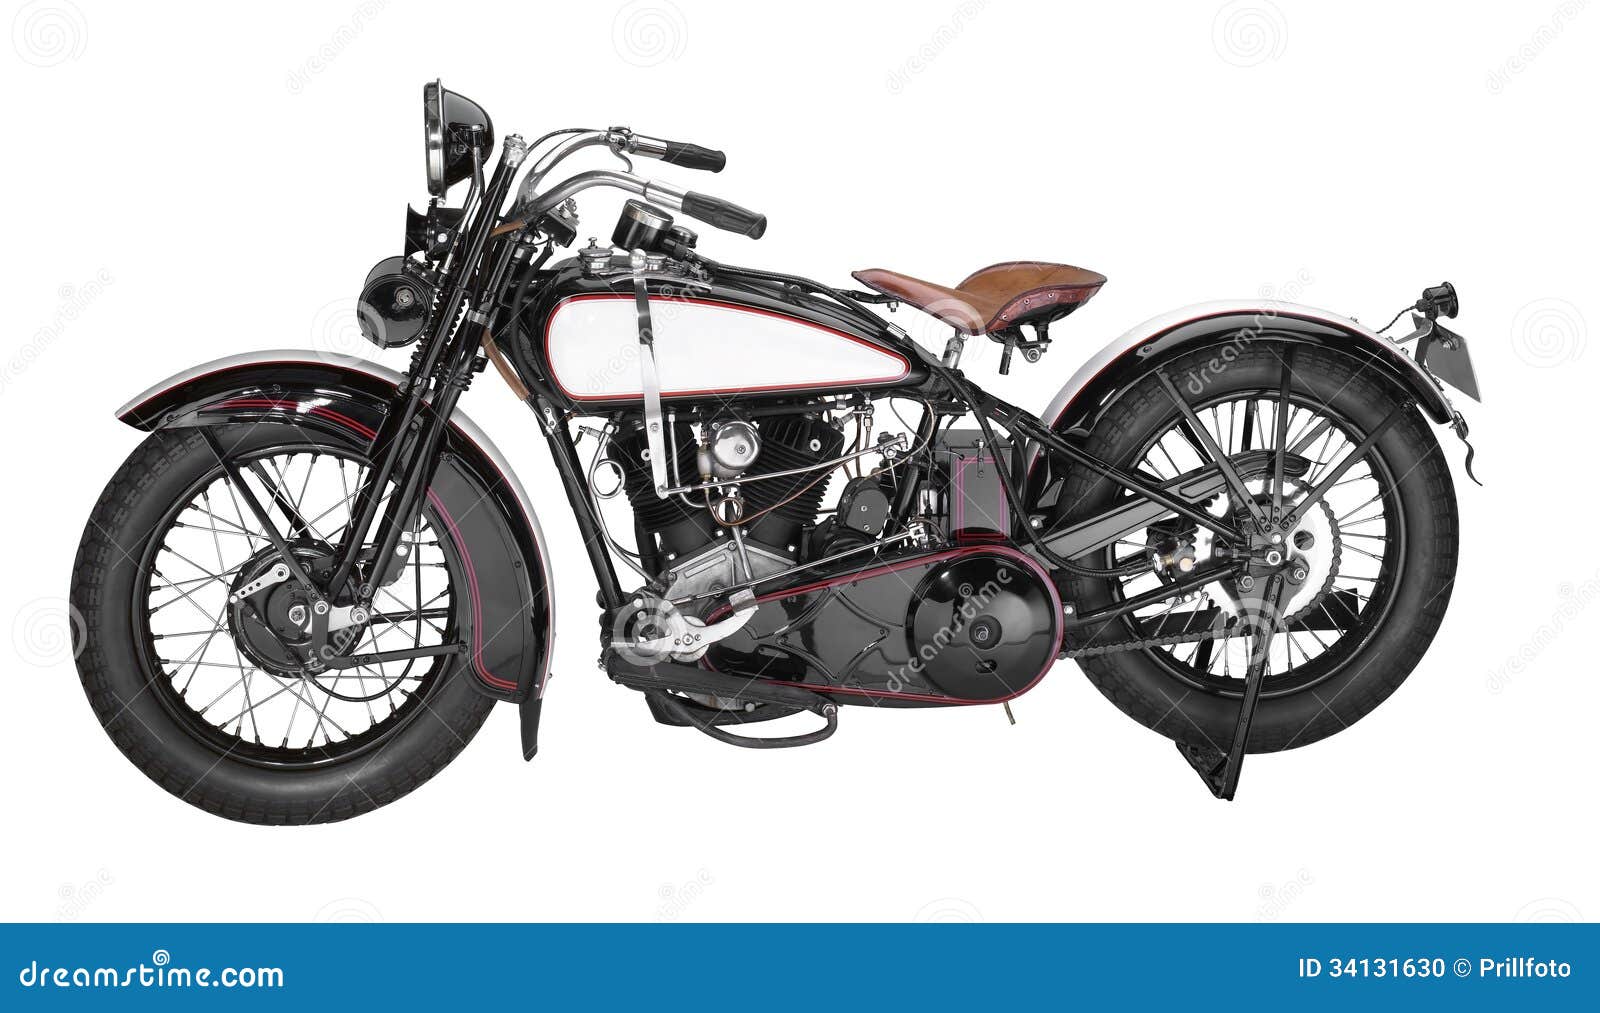 vintage motorcycle clipart - photo #33